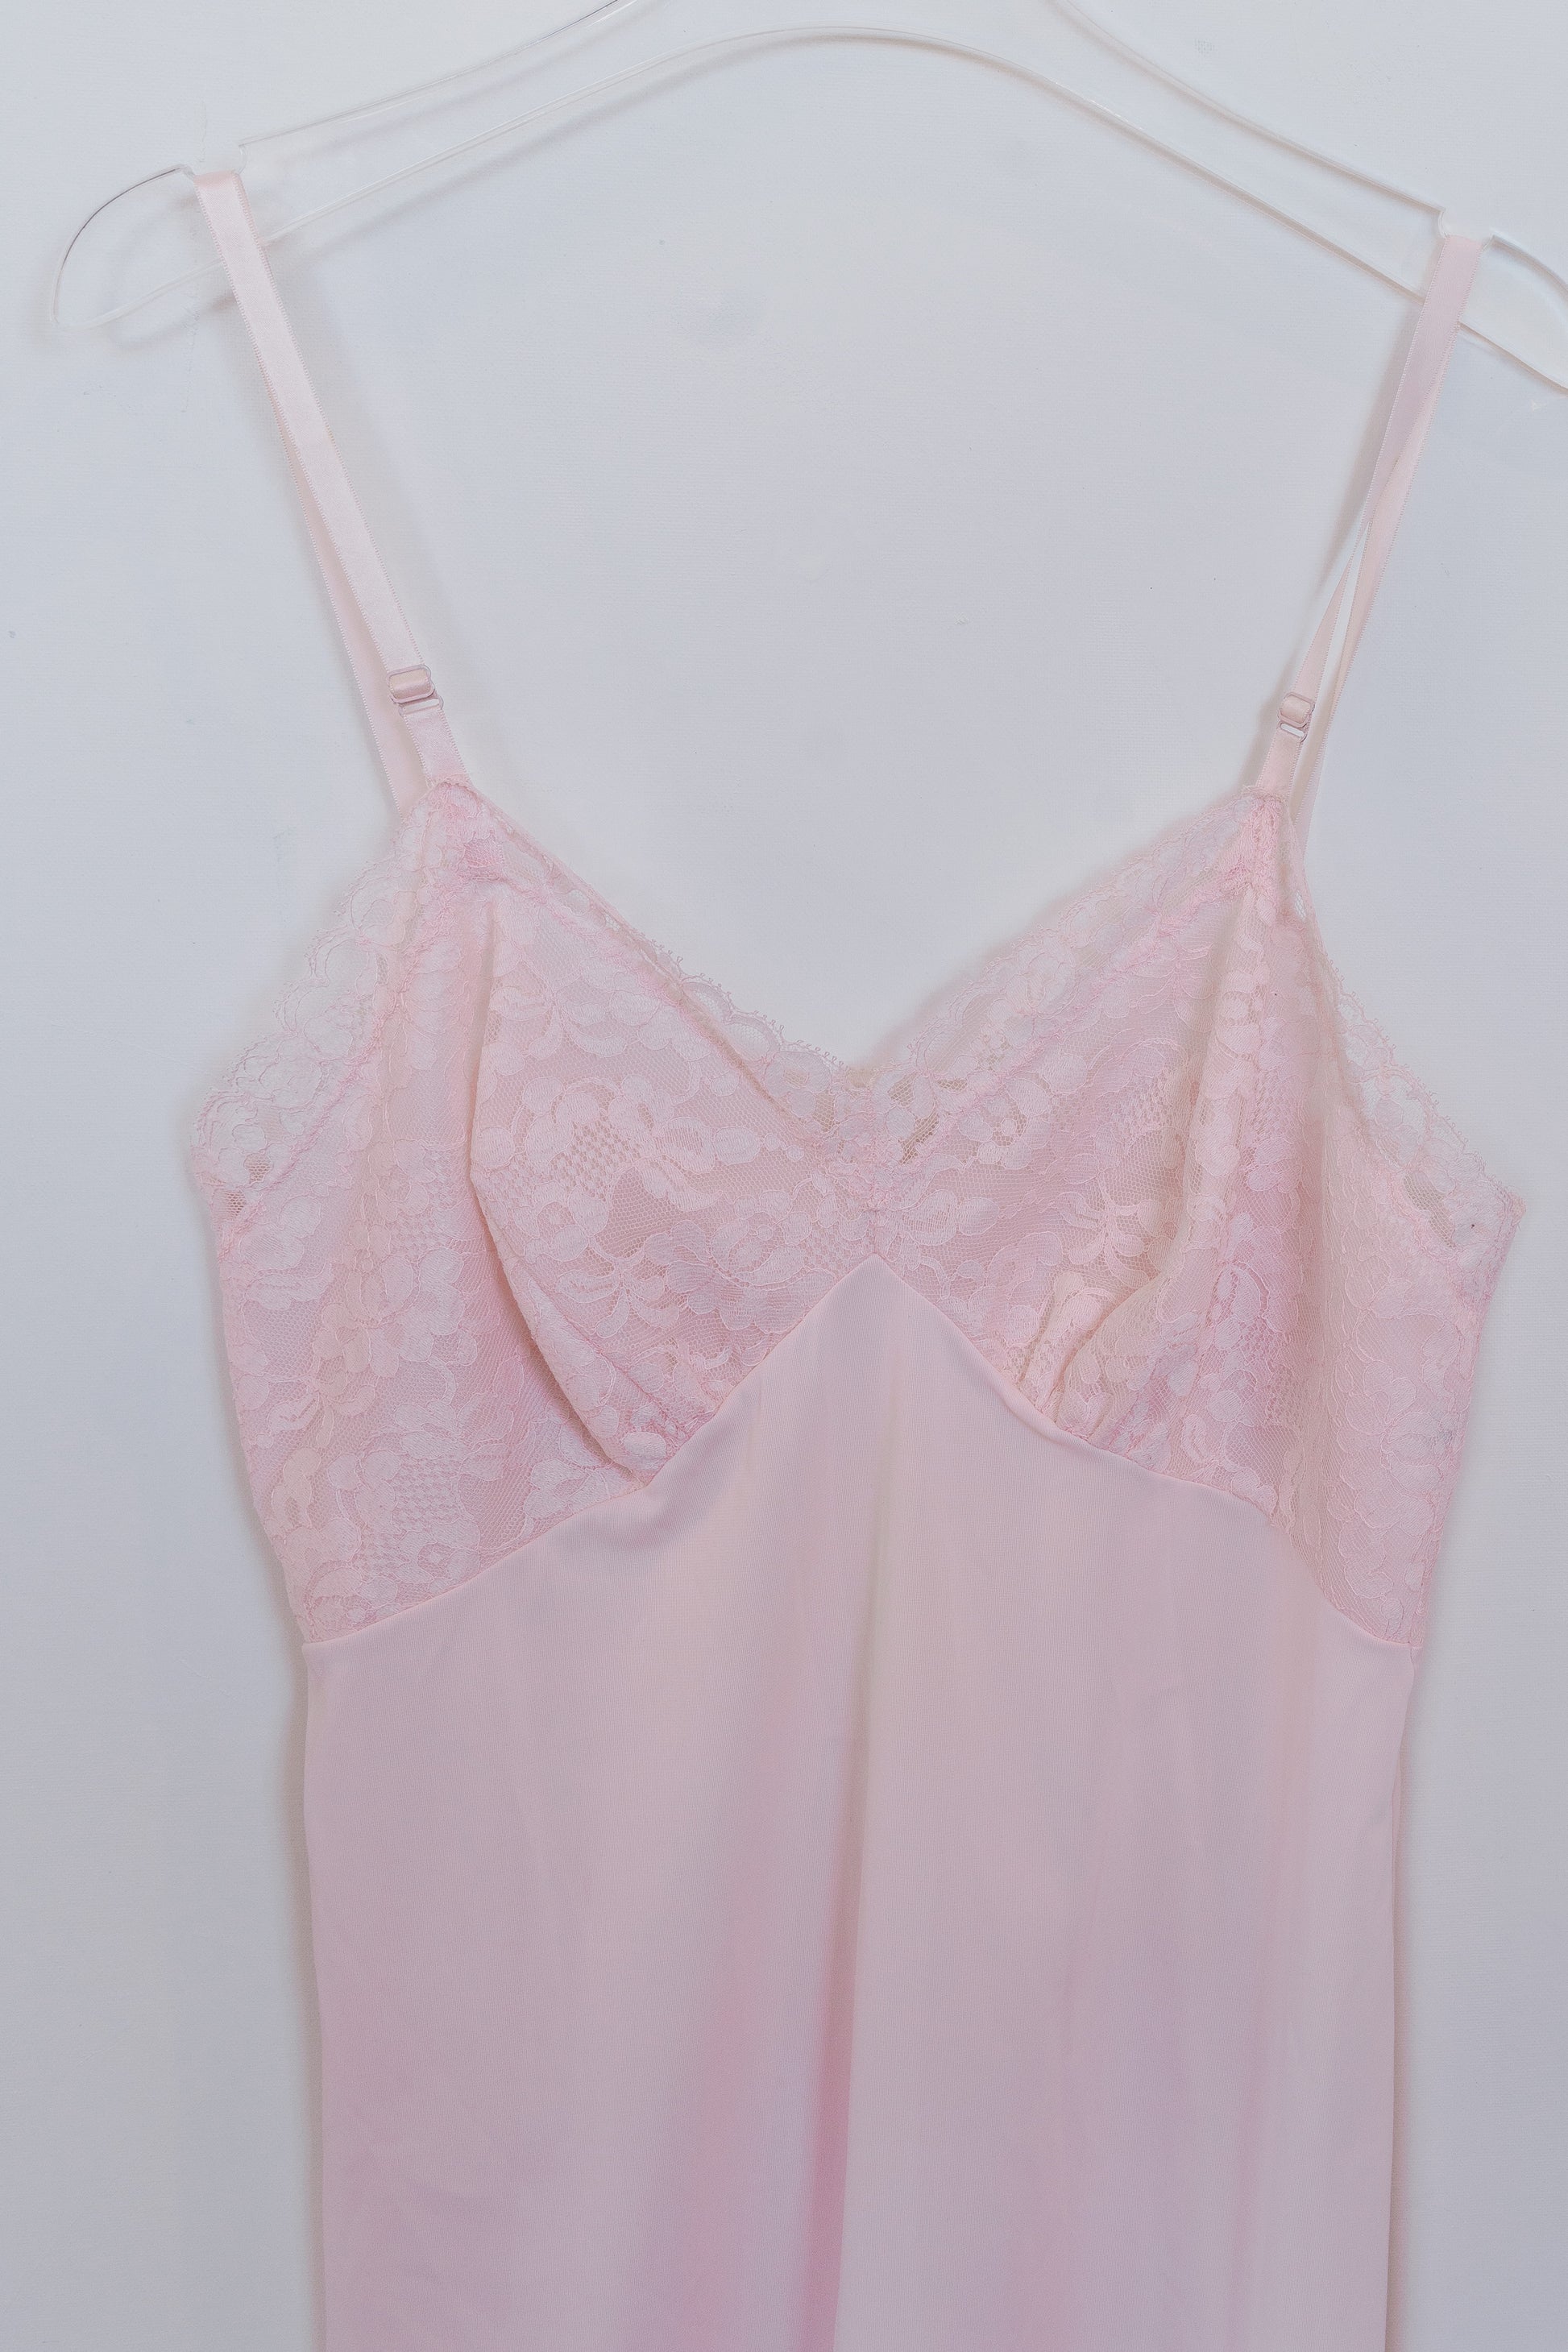 1930's Pink Silk Camisole Incredible Lace Applique Med - Ruby Lane